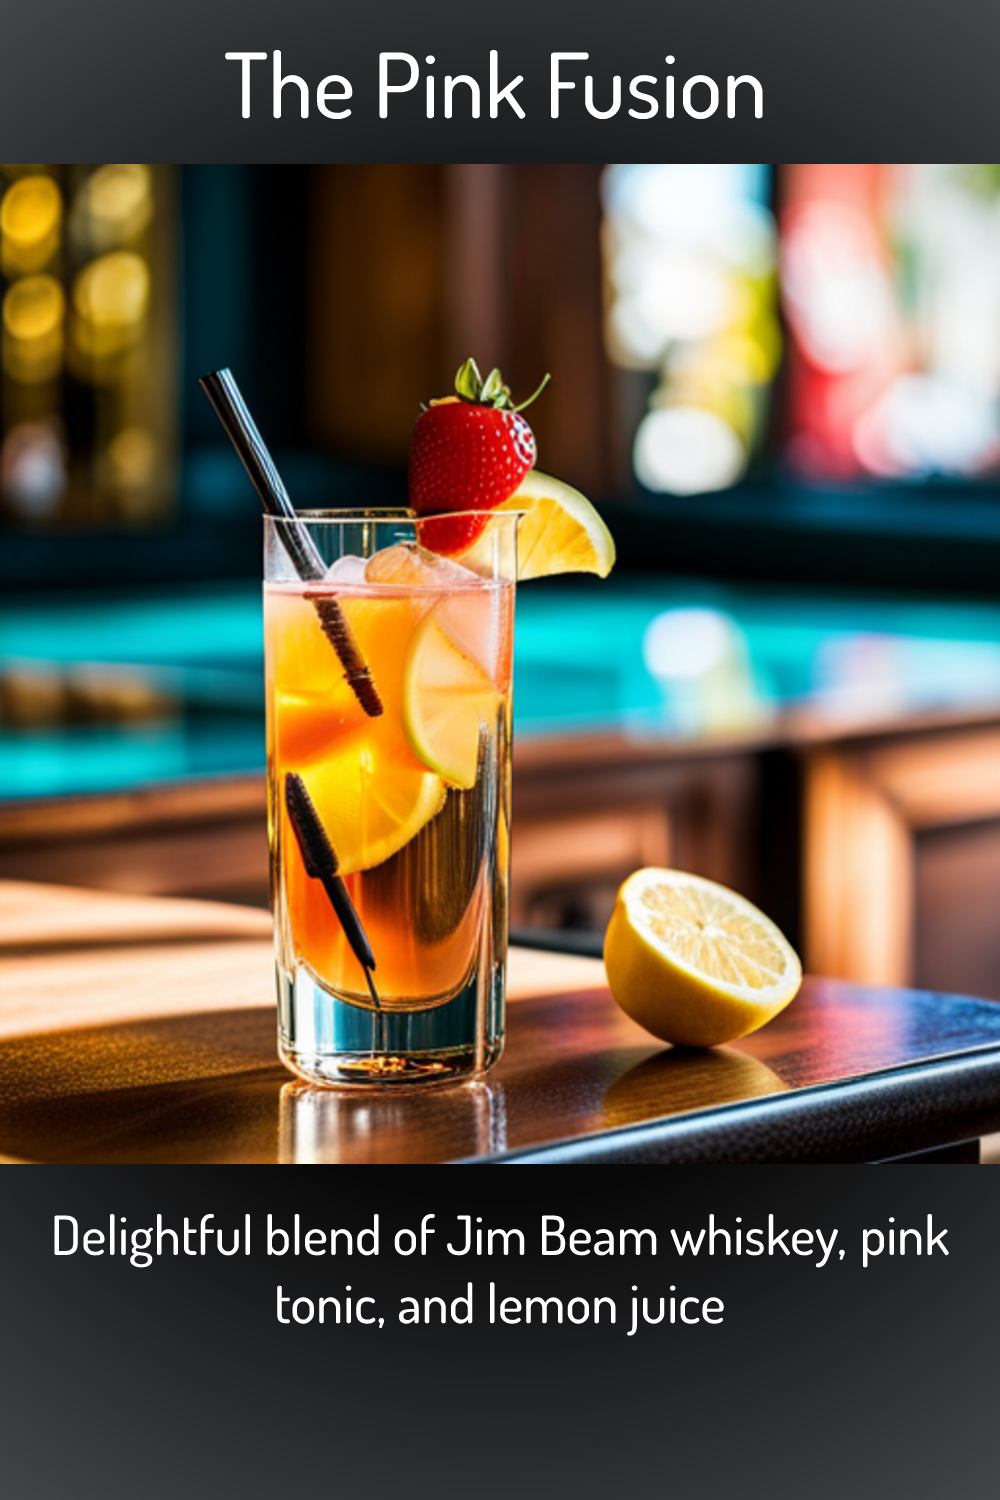 The Pink Fusion, Delightful blend of Jim Beam whiskey, pink tonic, and  lemon juice